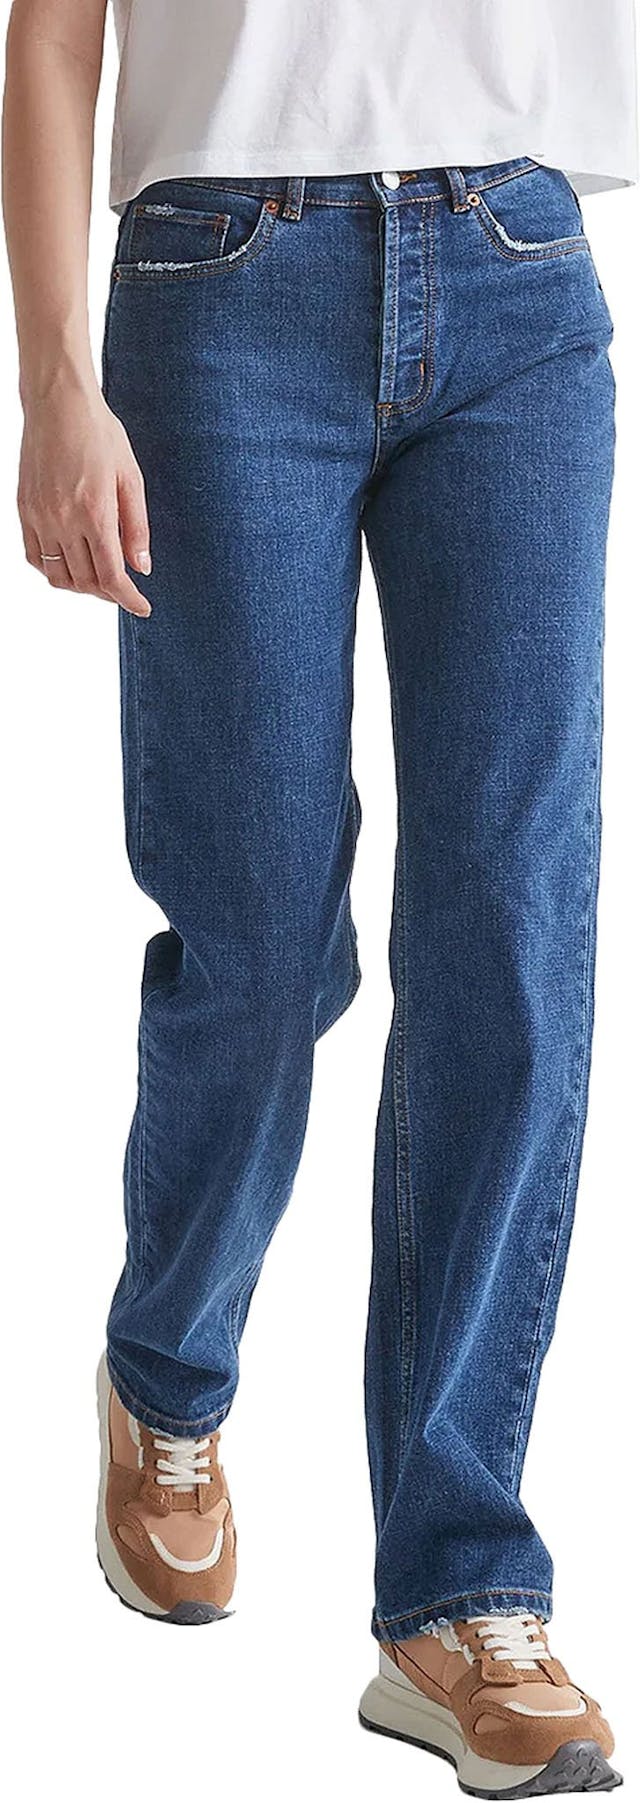 Product image for Midweight Performance Denim Loose Straight Jean - Women's